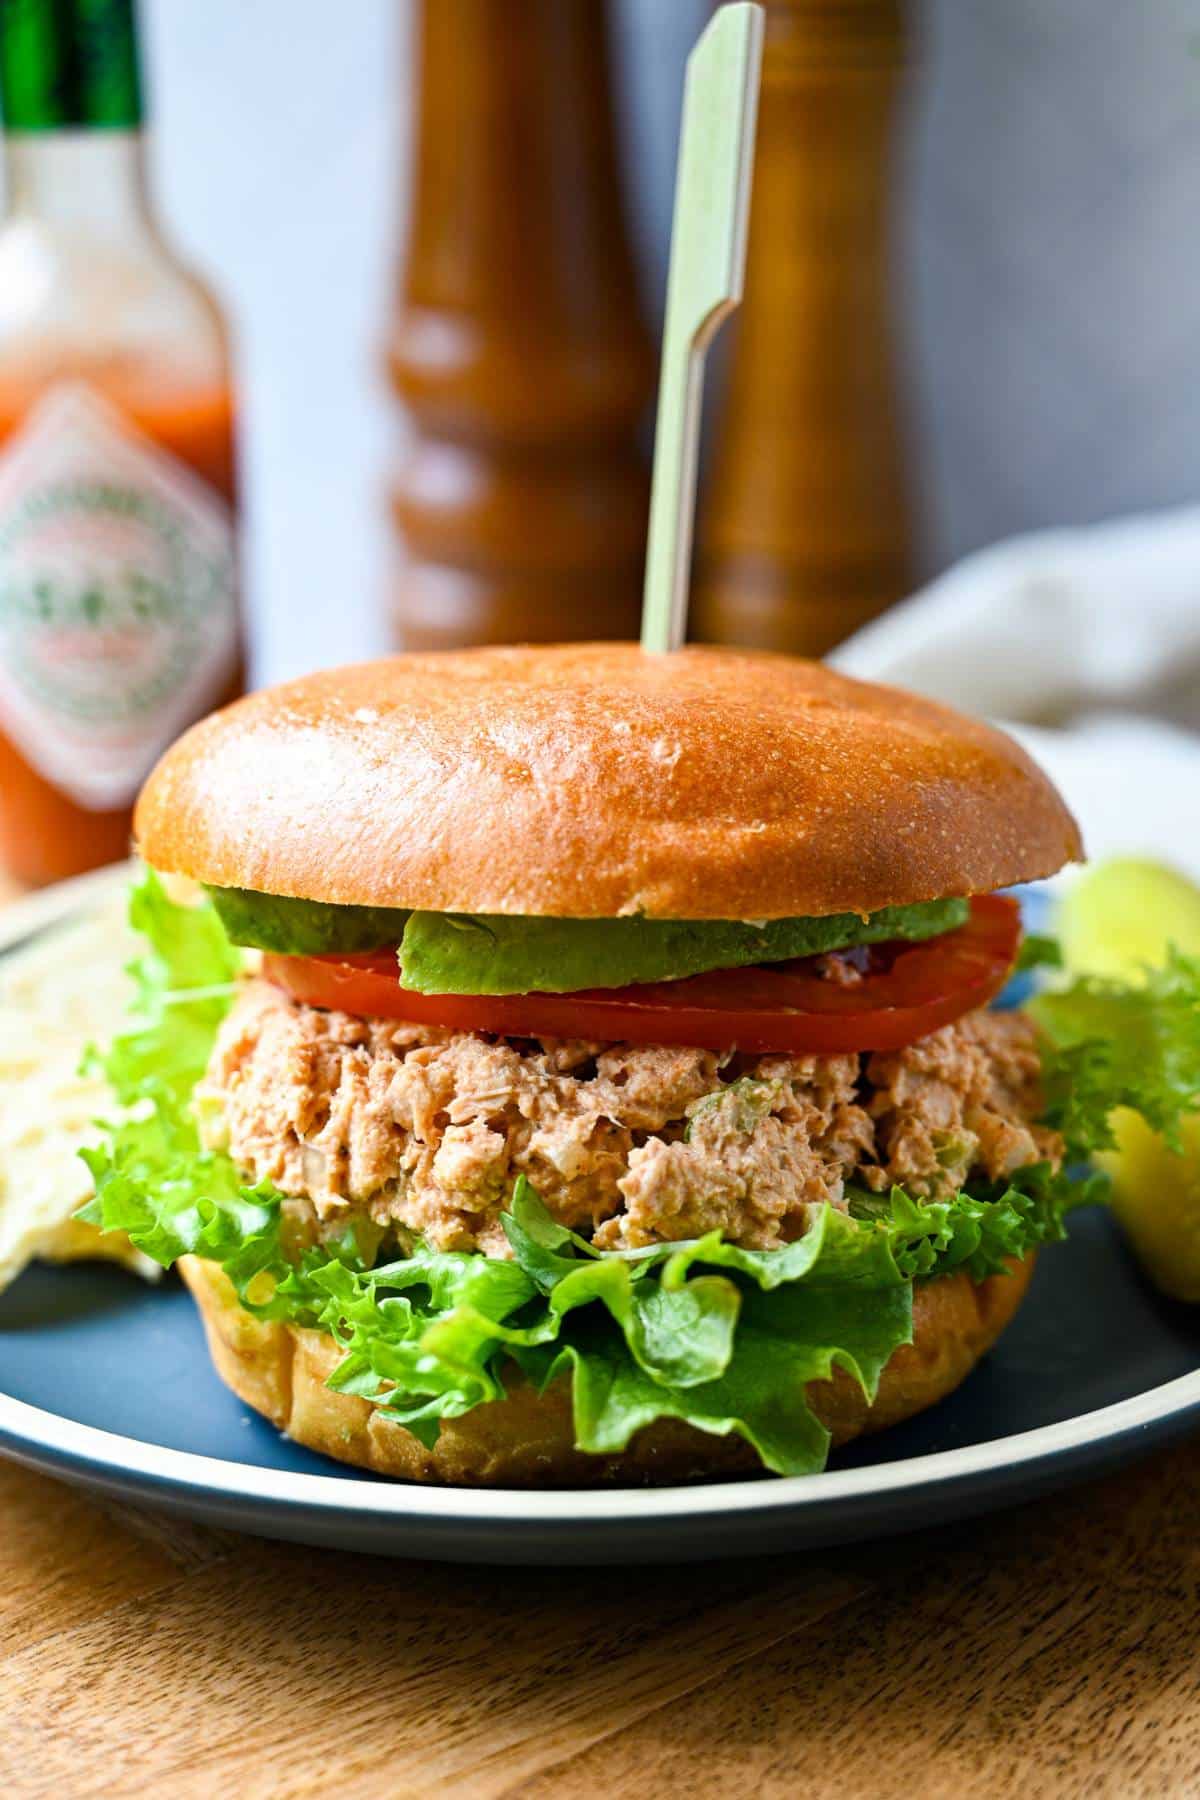 spicy tuna salad on a brioche bun with lettuce, tomato, and avocado with a pickle and chips on a plate